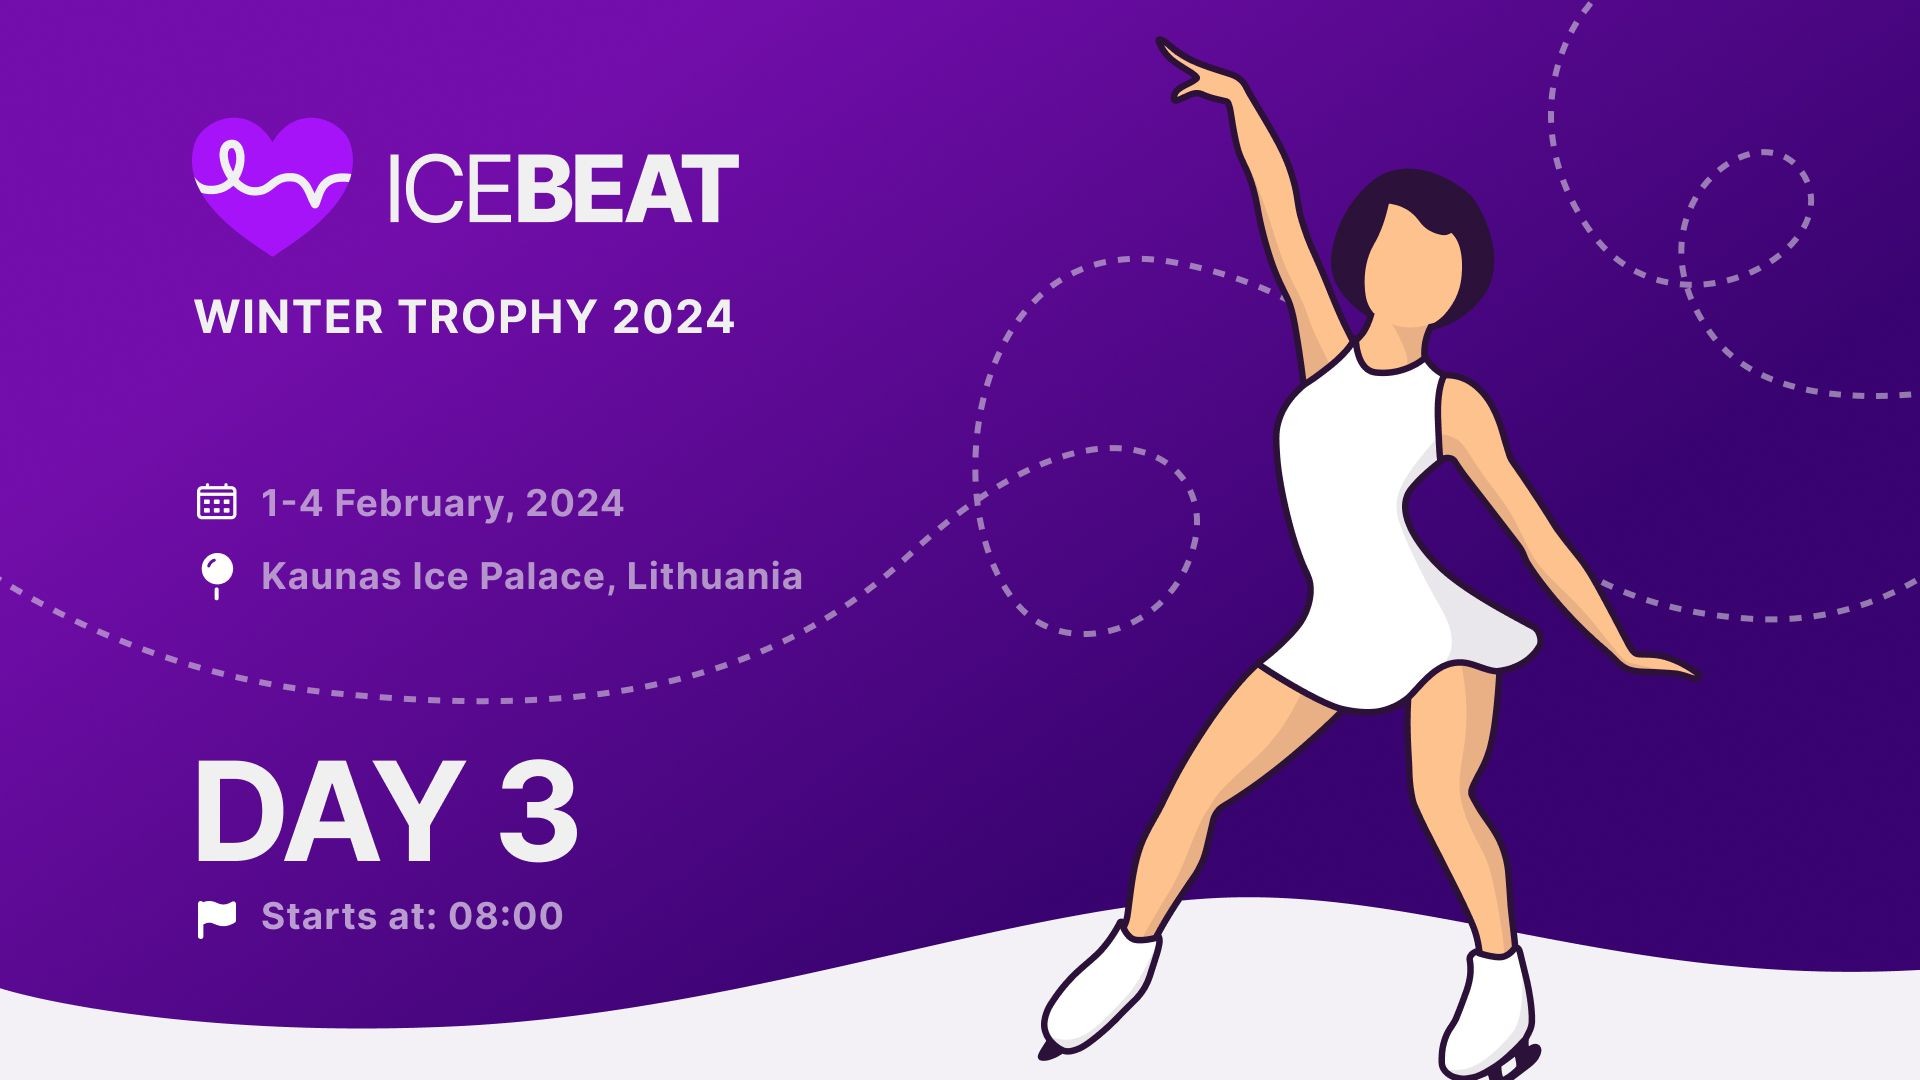 DAY 3 - ICEBEAT WINTER TROPHY 2024